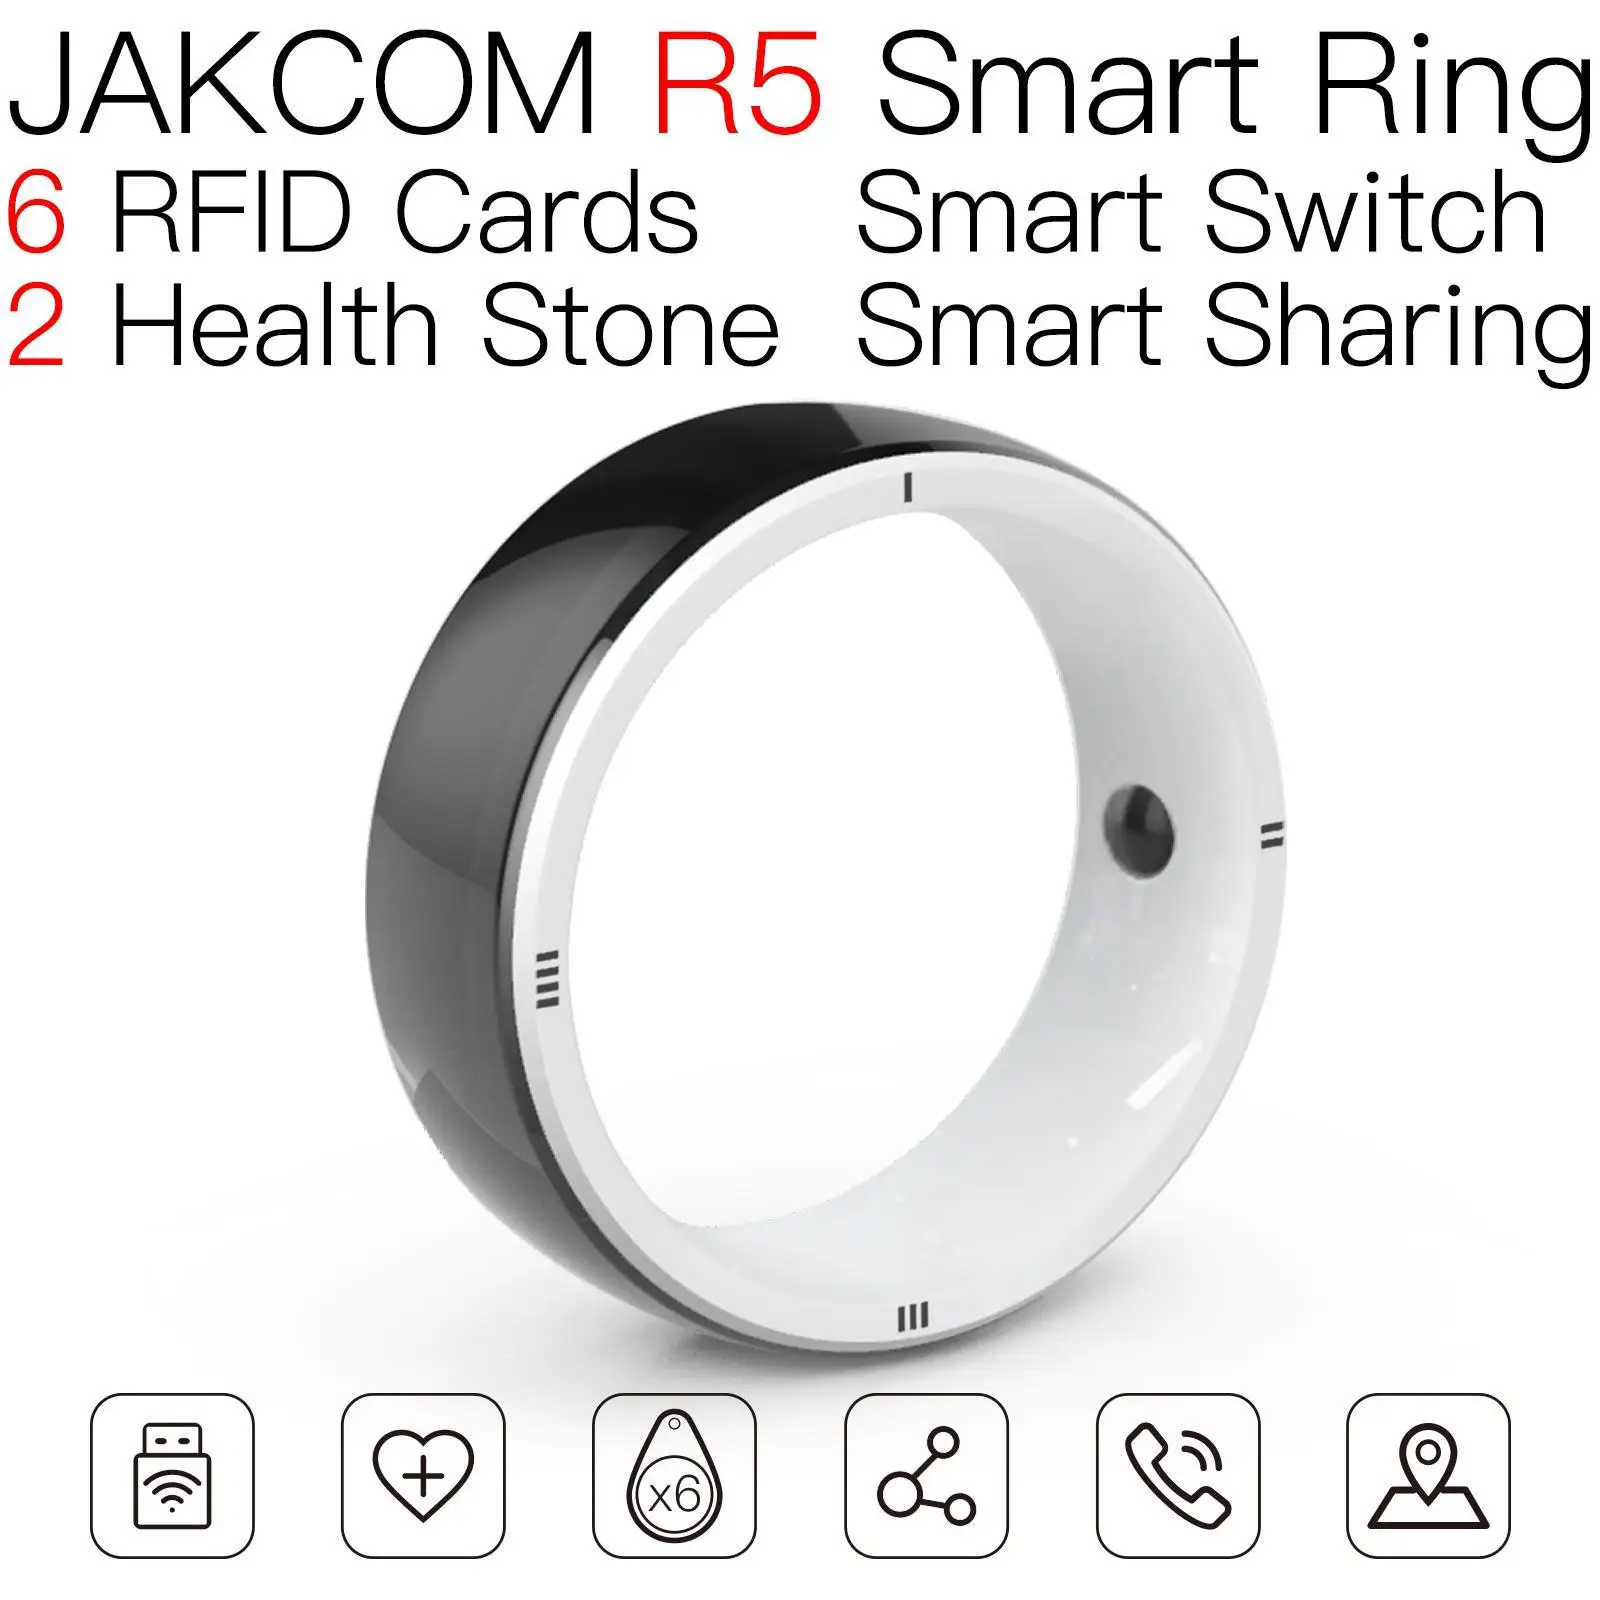 

JAKCOM R5 Smart Ring Super value than card 331 nfc tag nano rfid truck carte seringa 100 copy to android chip